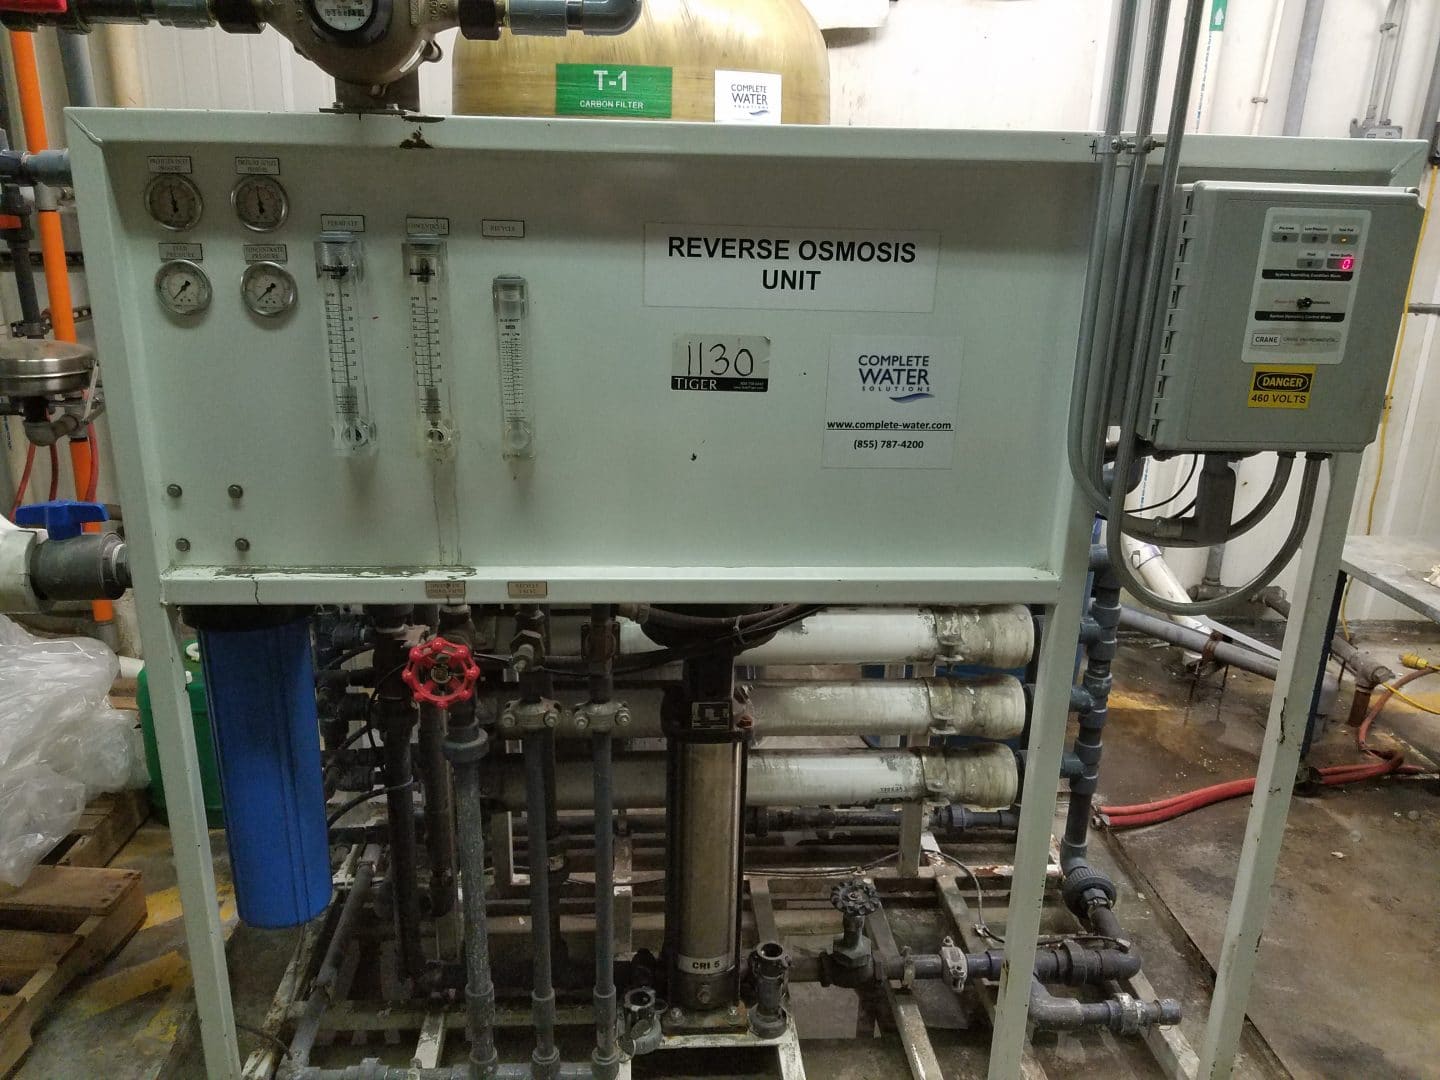 food manufacturer ro problems, reverse osmosis for food industry, complete water solutions